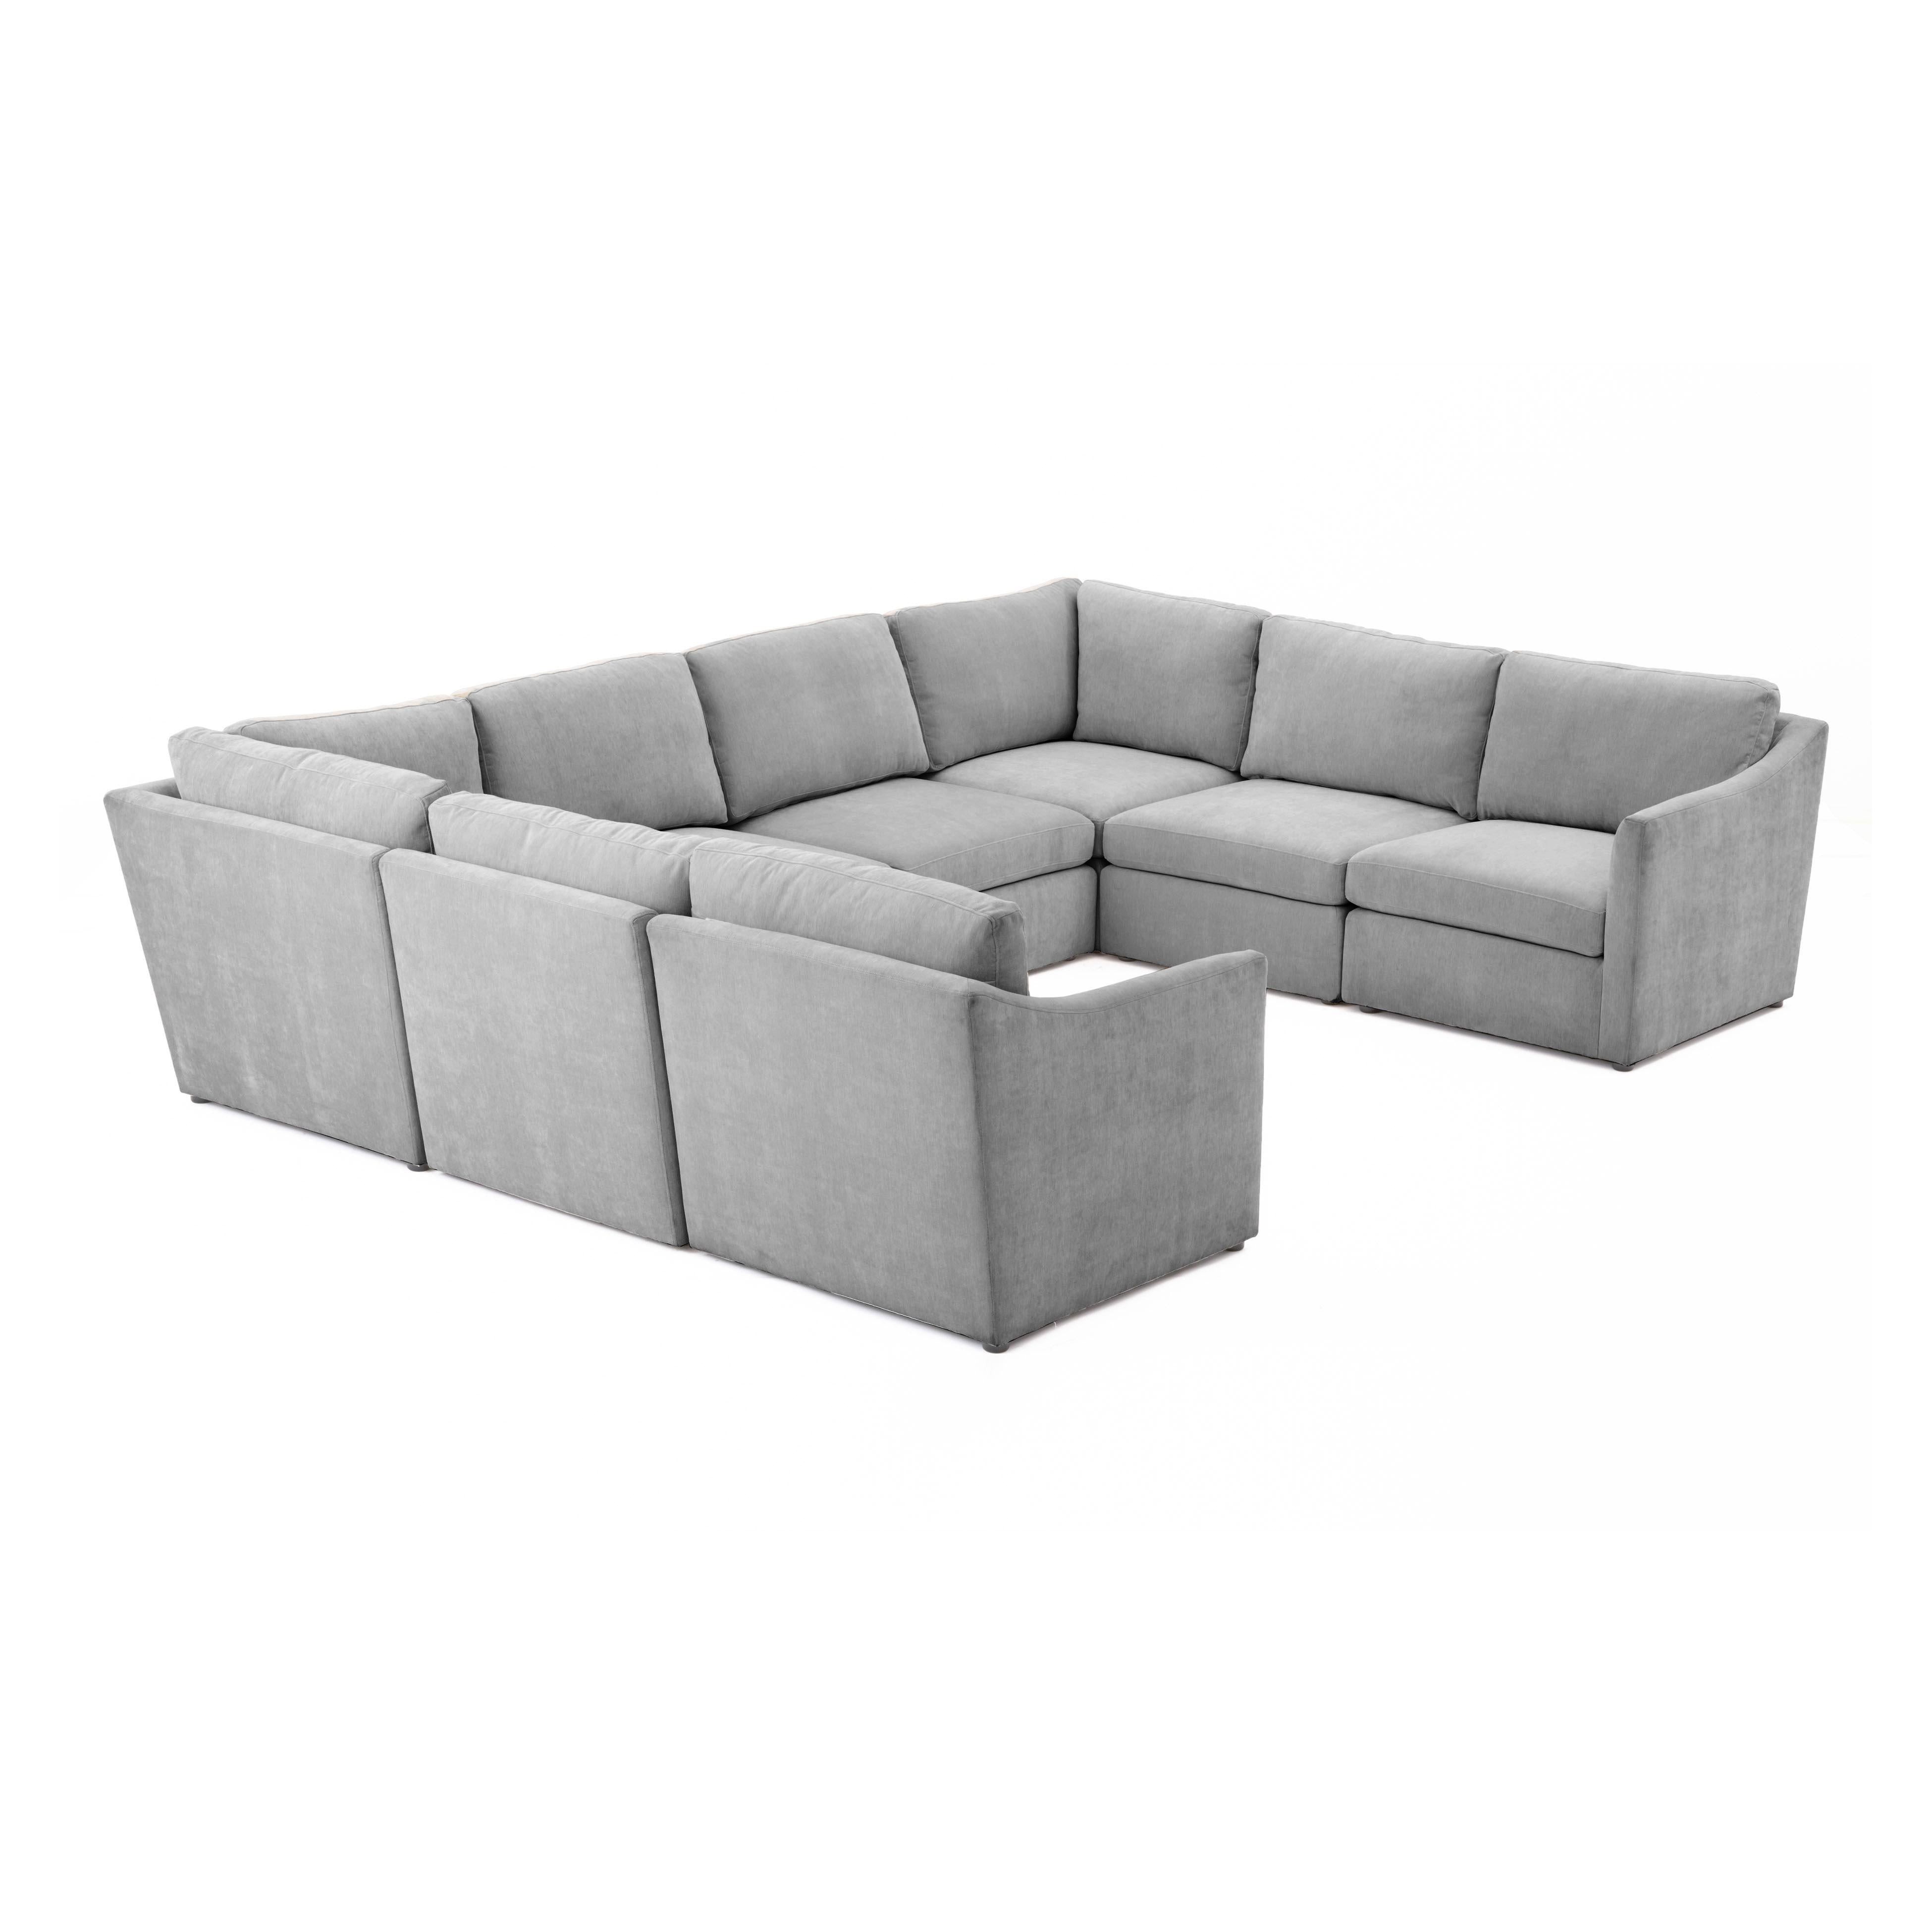 Tov Furniture Sectionals - Aiden Gray Modular U Sectional